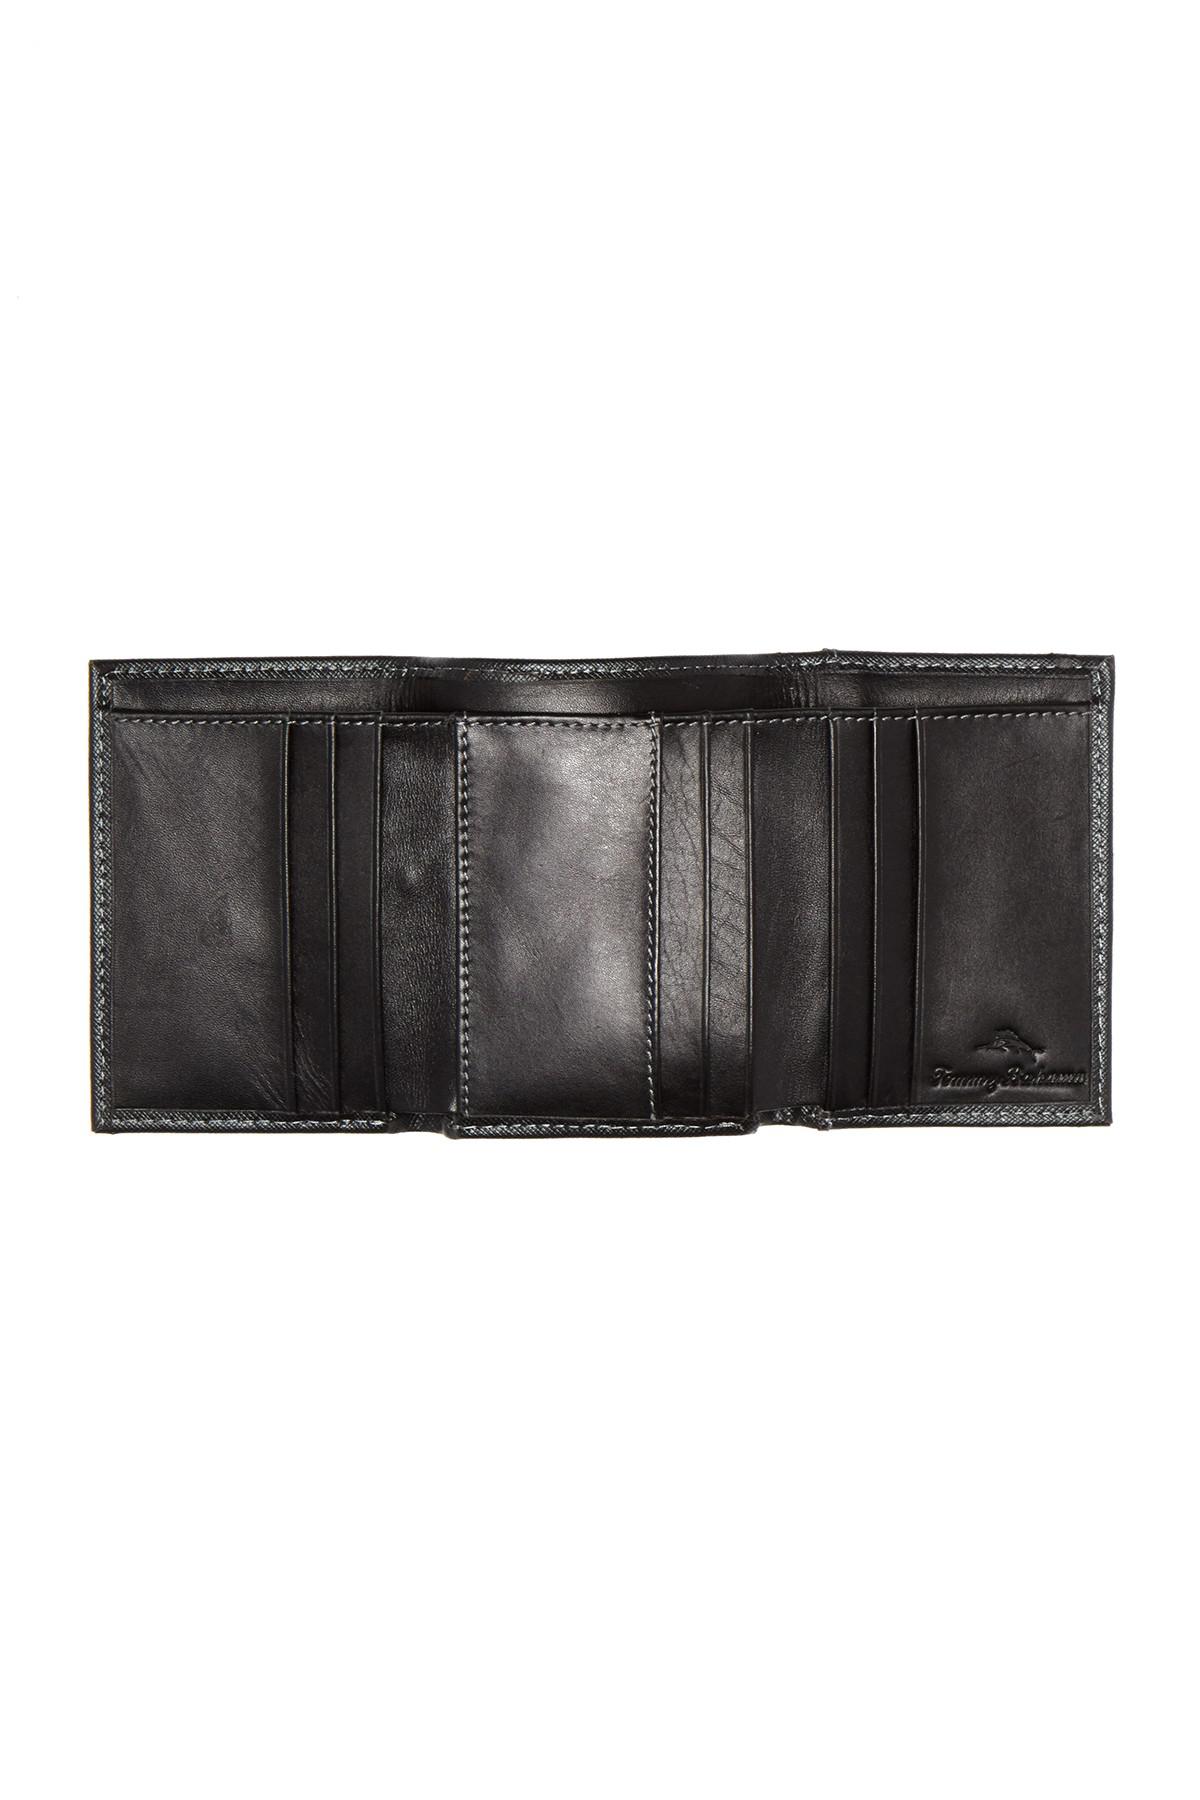 Tommy Bahama Sorrento Leather Trifold Wallet in Black for Men - Lyst